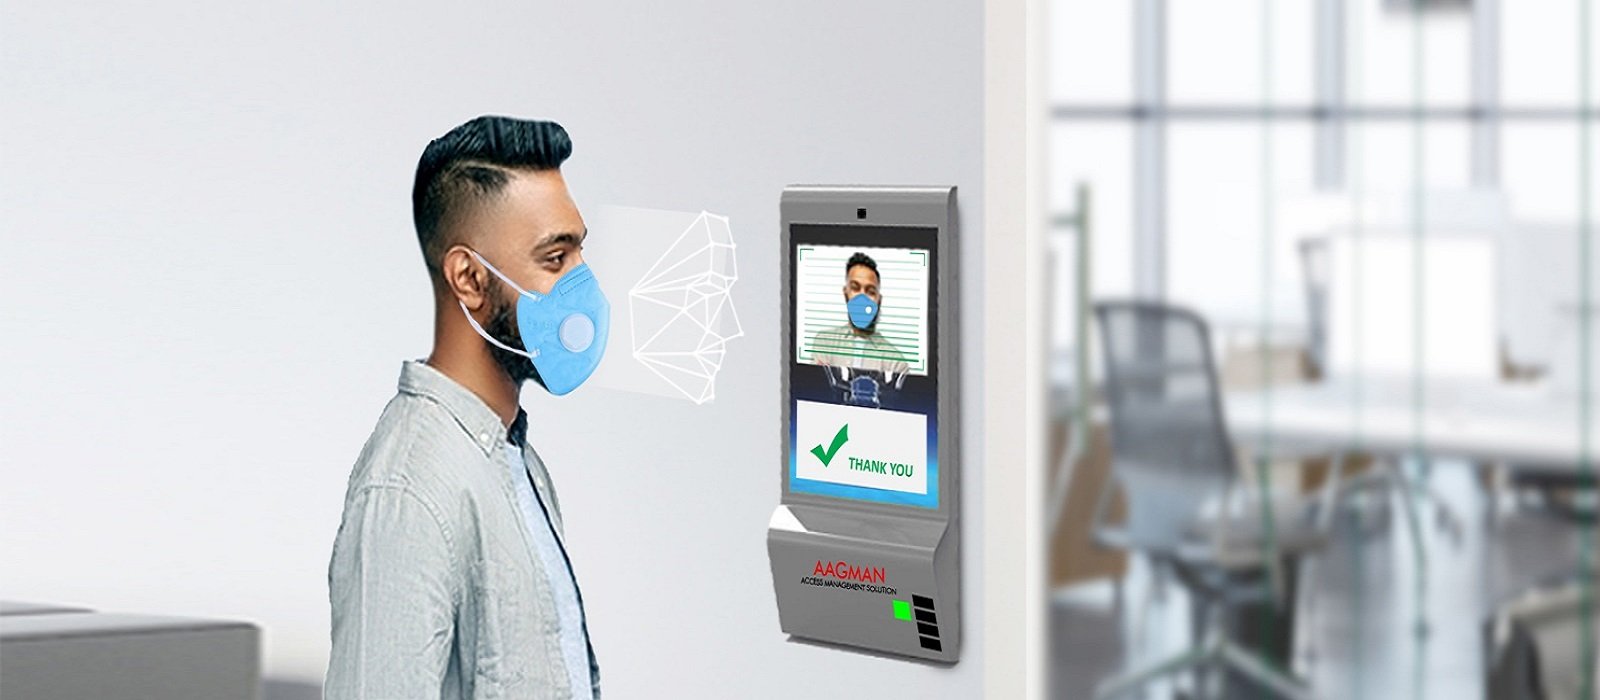 person standing infront of wall mount kiosk with mask and his presence marked